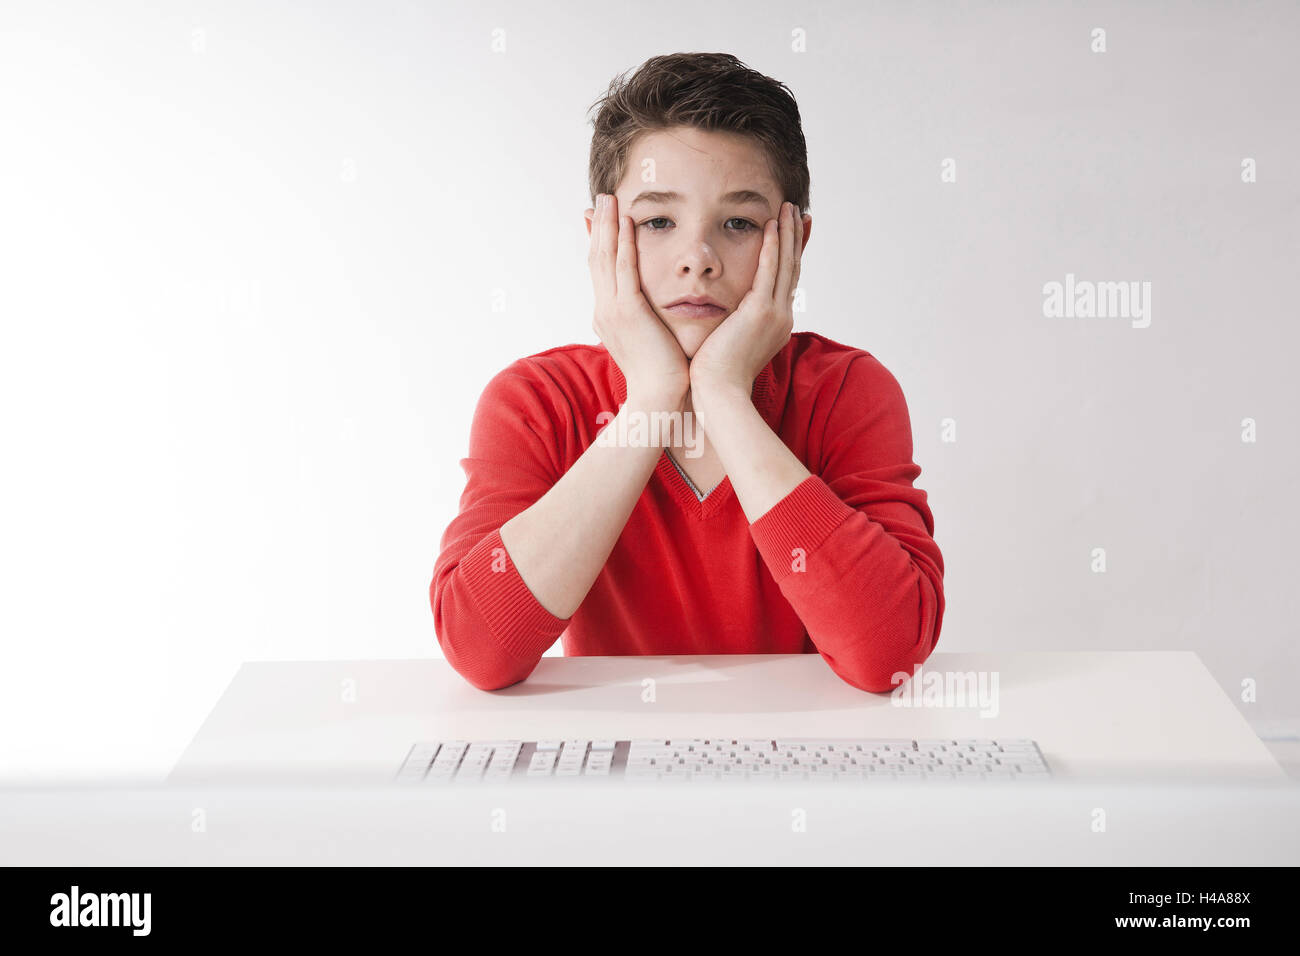 Teenagers, boy, sit, desperately, studio, young person, Teen, keyboard, sadly, portrait, person, Stock Photo